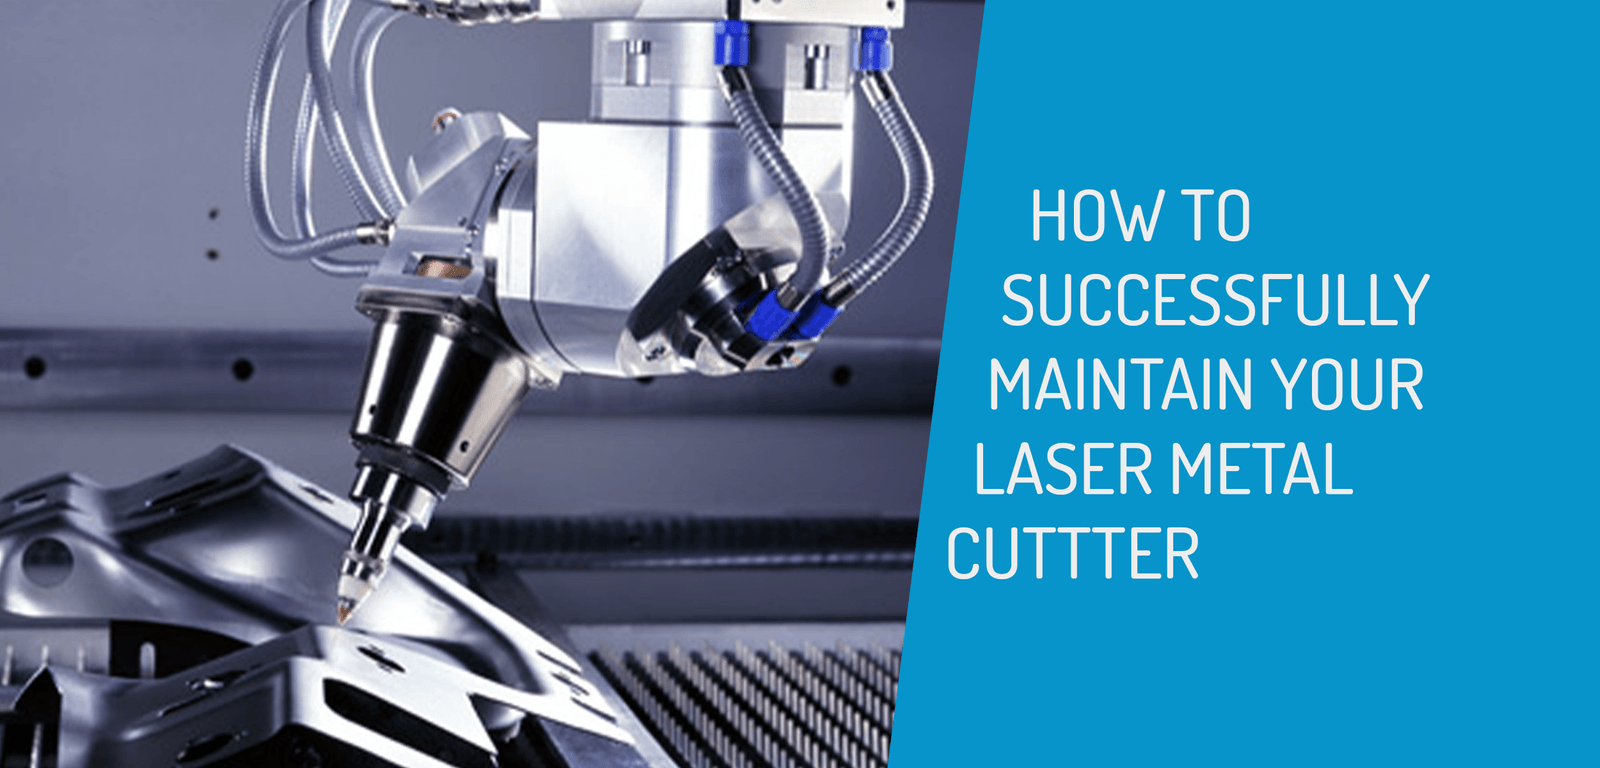 5 Ways to Maintain Your Metal Laser Cutter